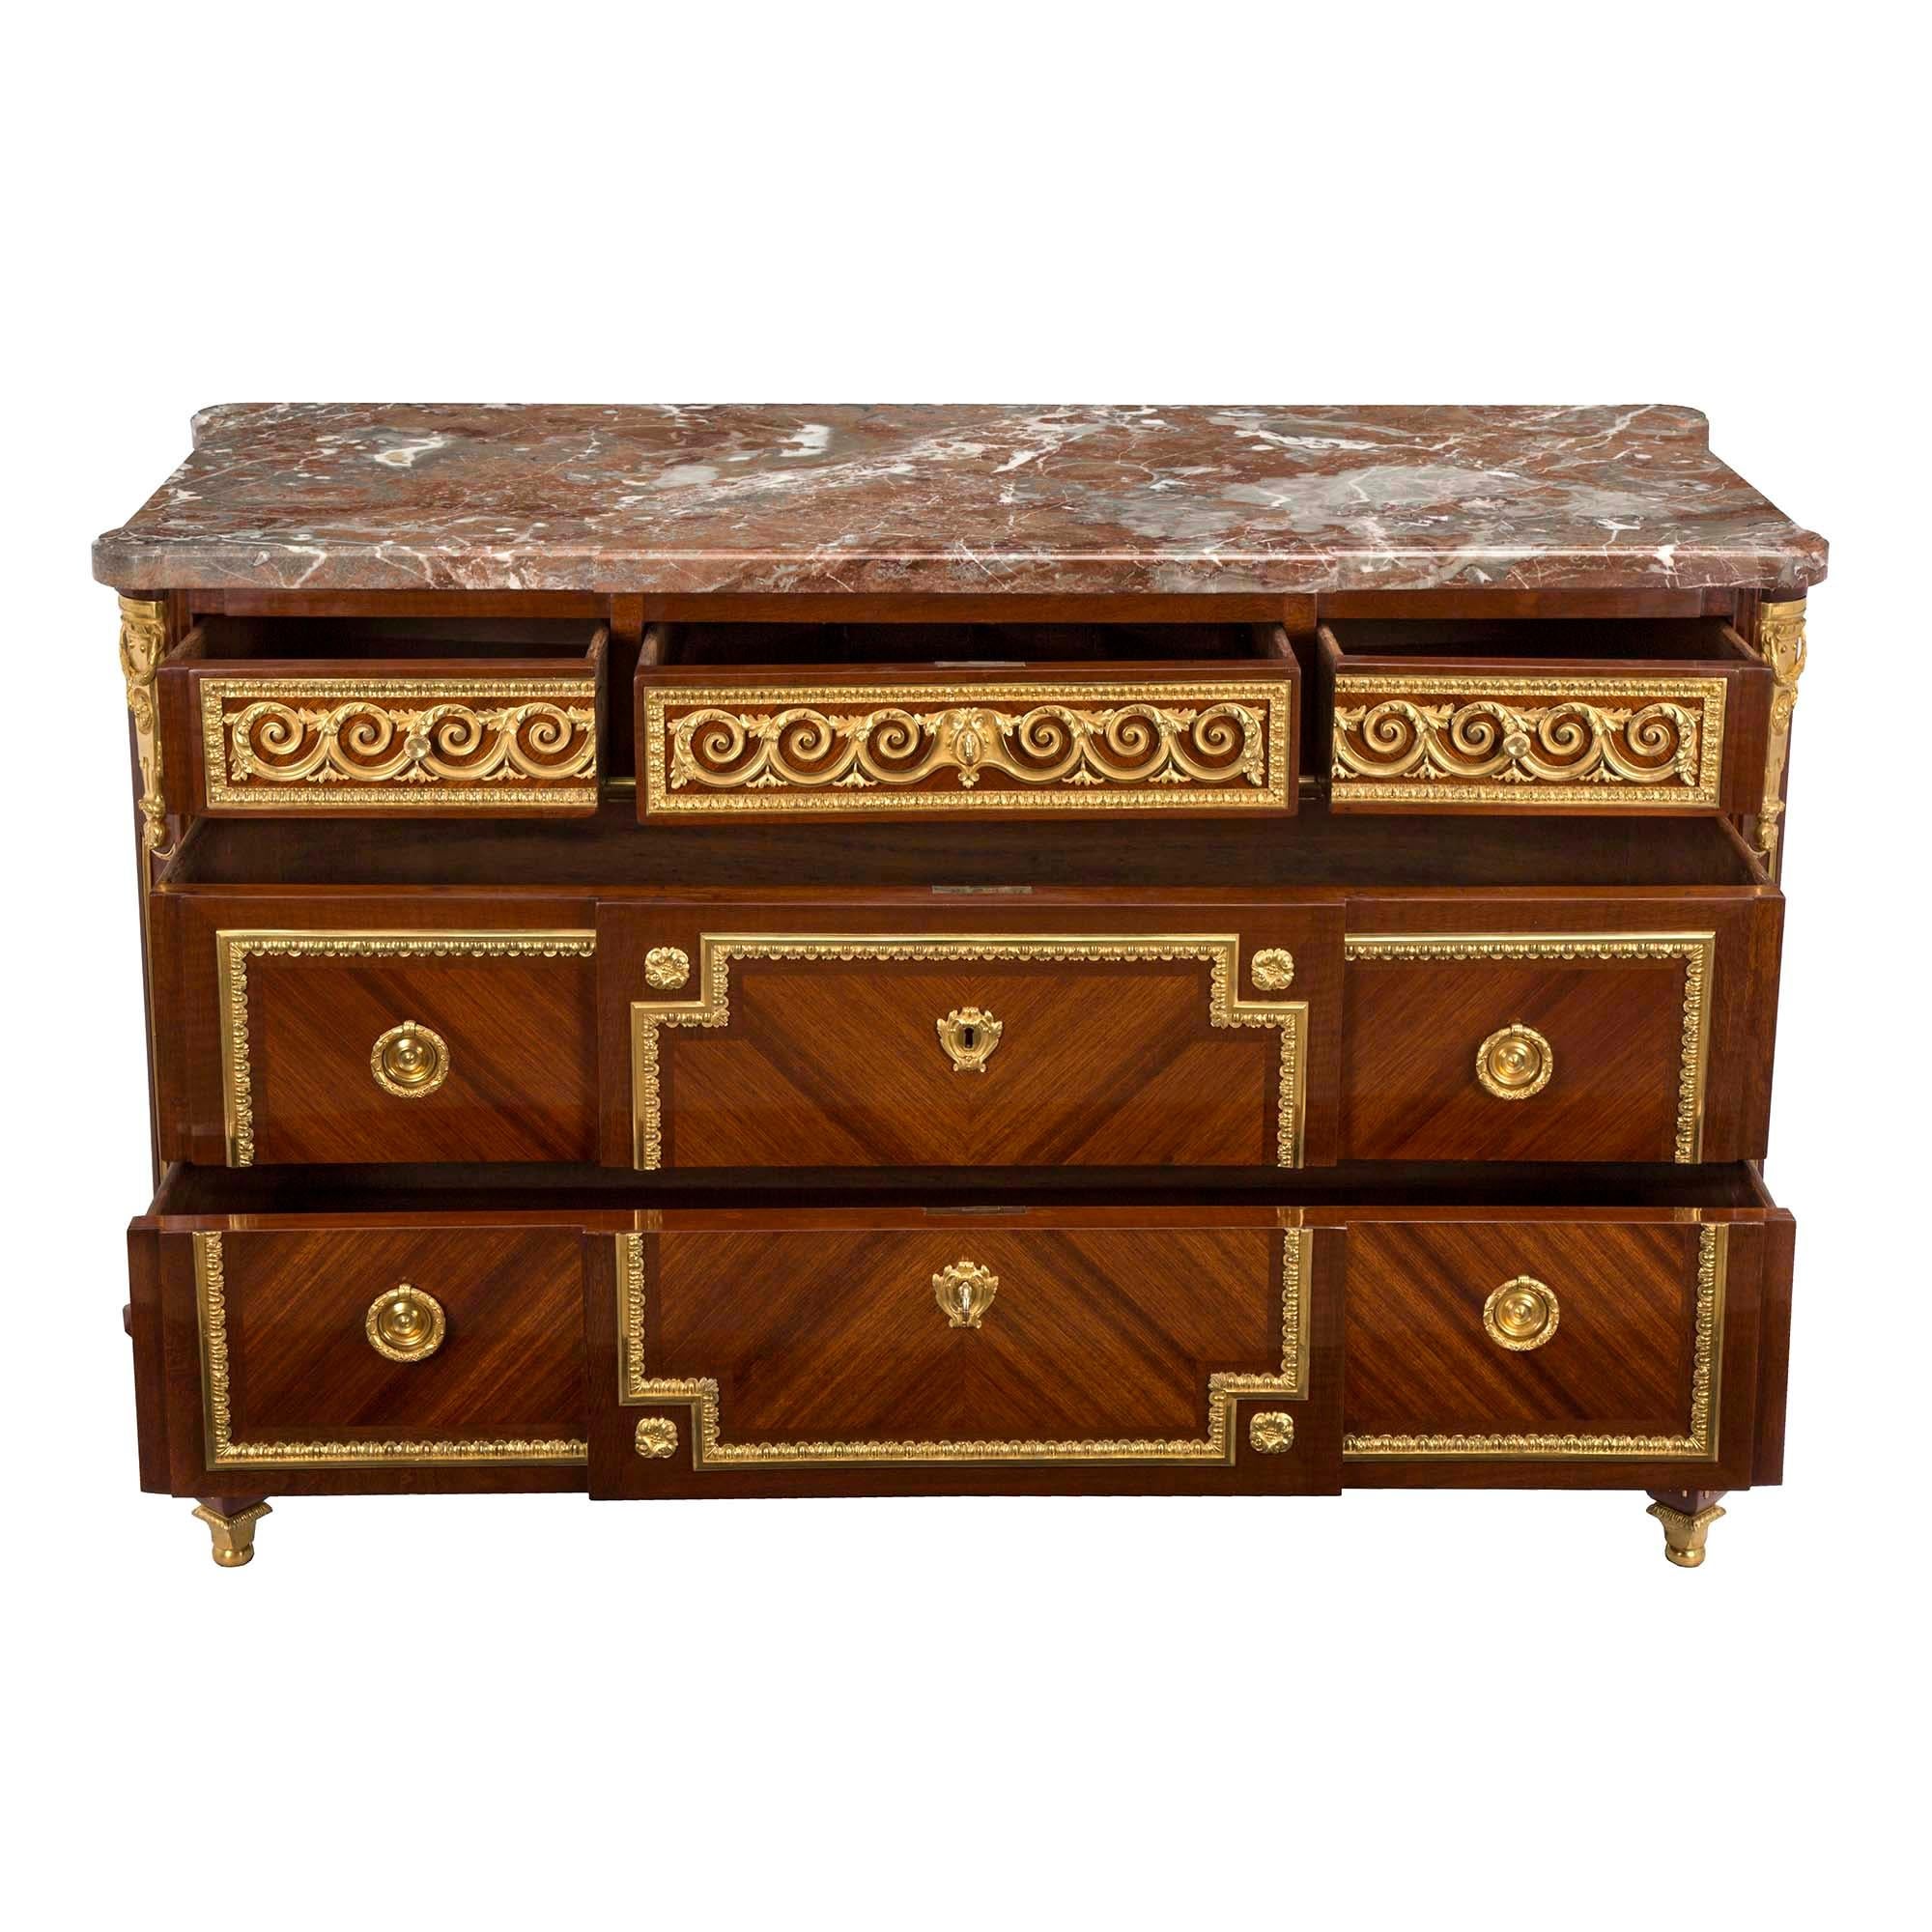 A magnificent and high quality French early 19th century Louis XVI st. tulipwood and ormolu five drawer chest. The chest is raised by unusual and most handsome square tapered feet with unique extremely decorative square and ball sabots below elegant